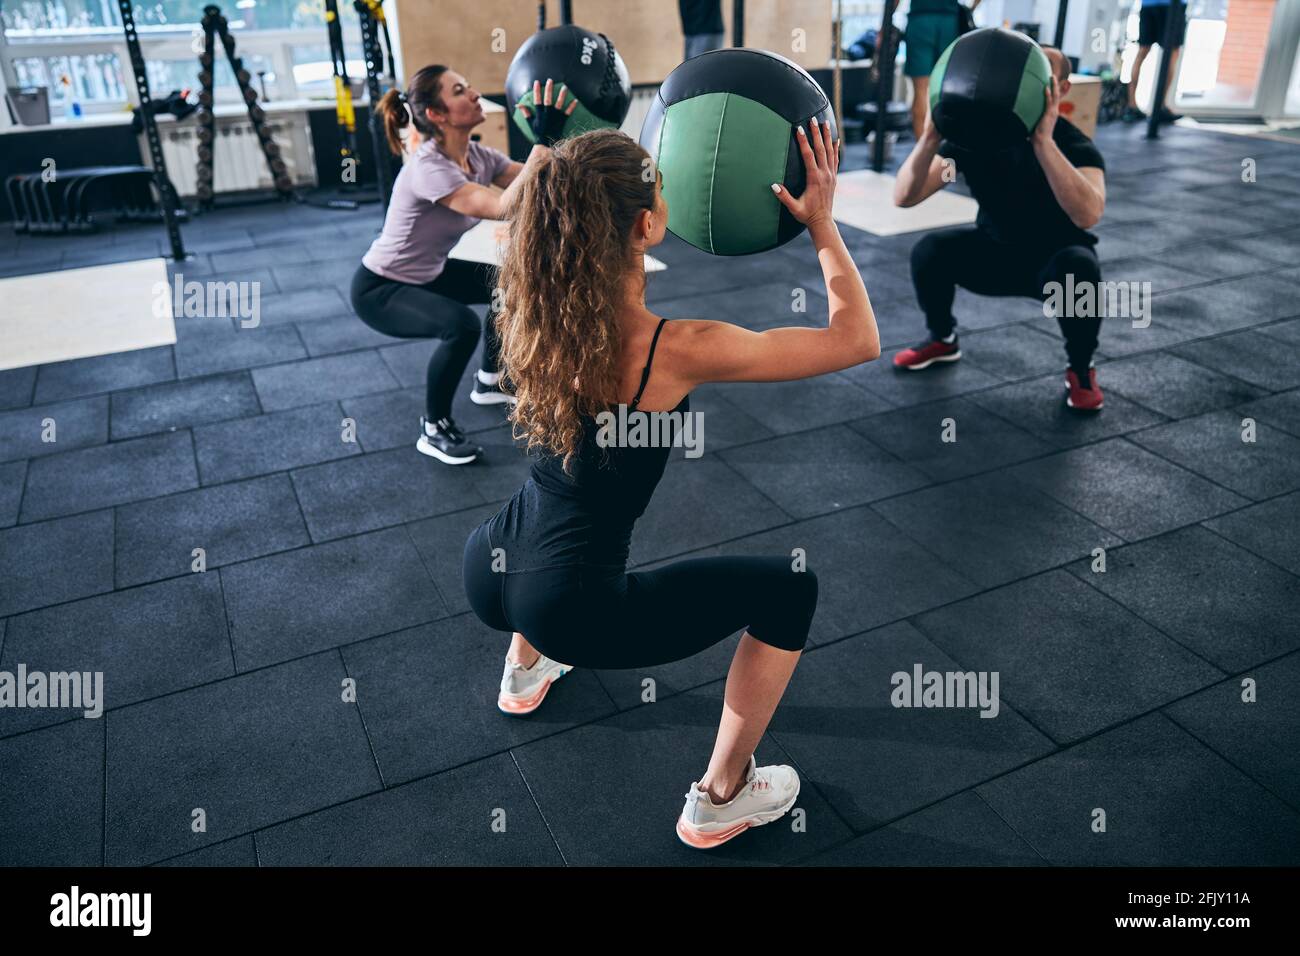 Three people doing squats with stability balls Stock Photo